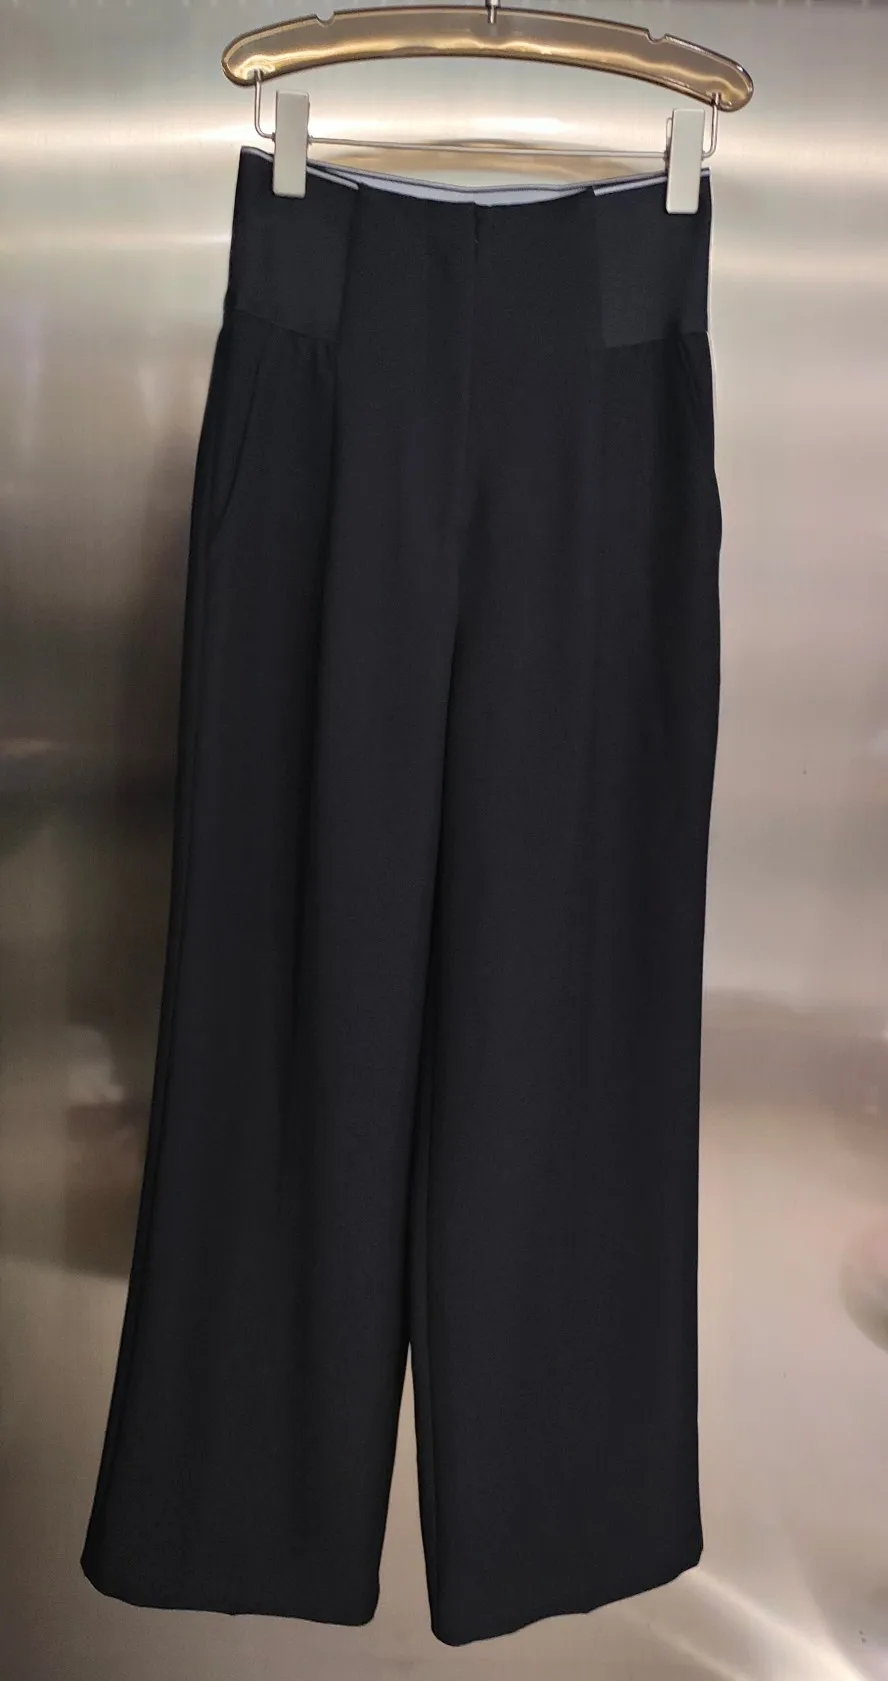 Black wide-leg pants casual lazy casual people wear never out of date durable